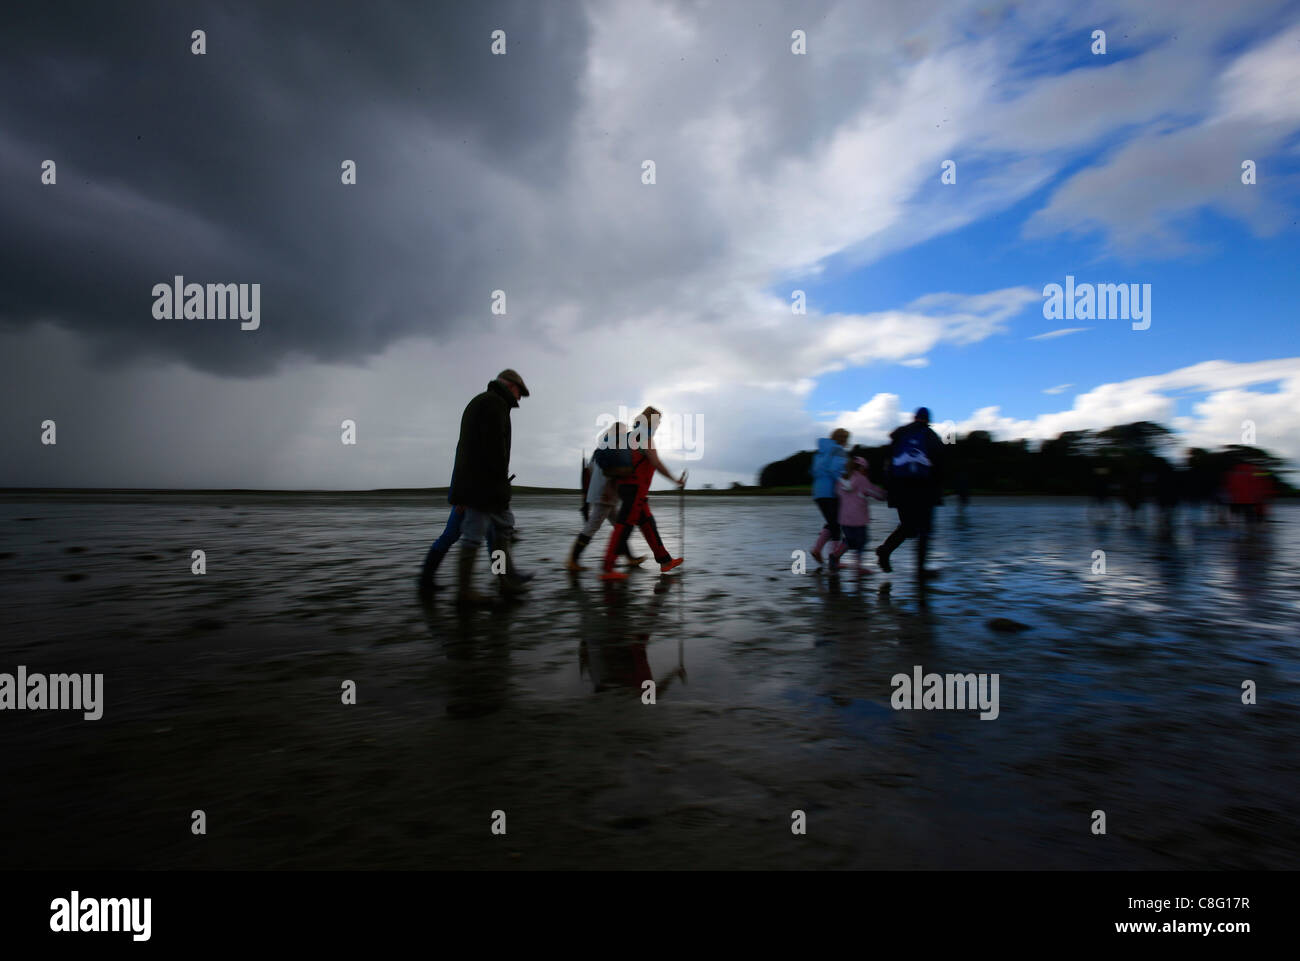 A small group of people explore as they walk along the shore under a stormy sky Stock Photo